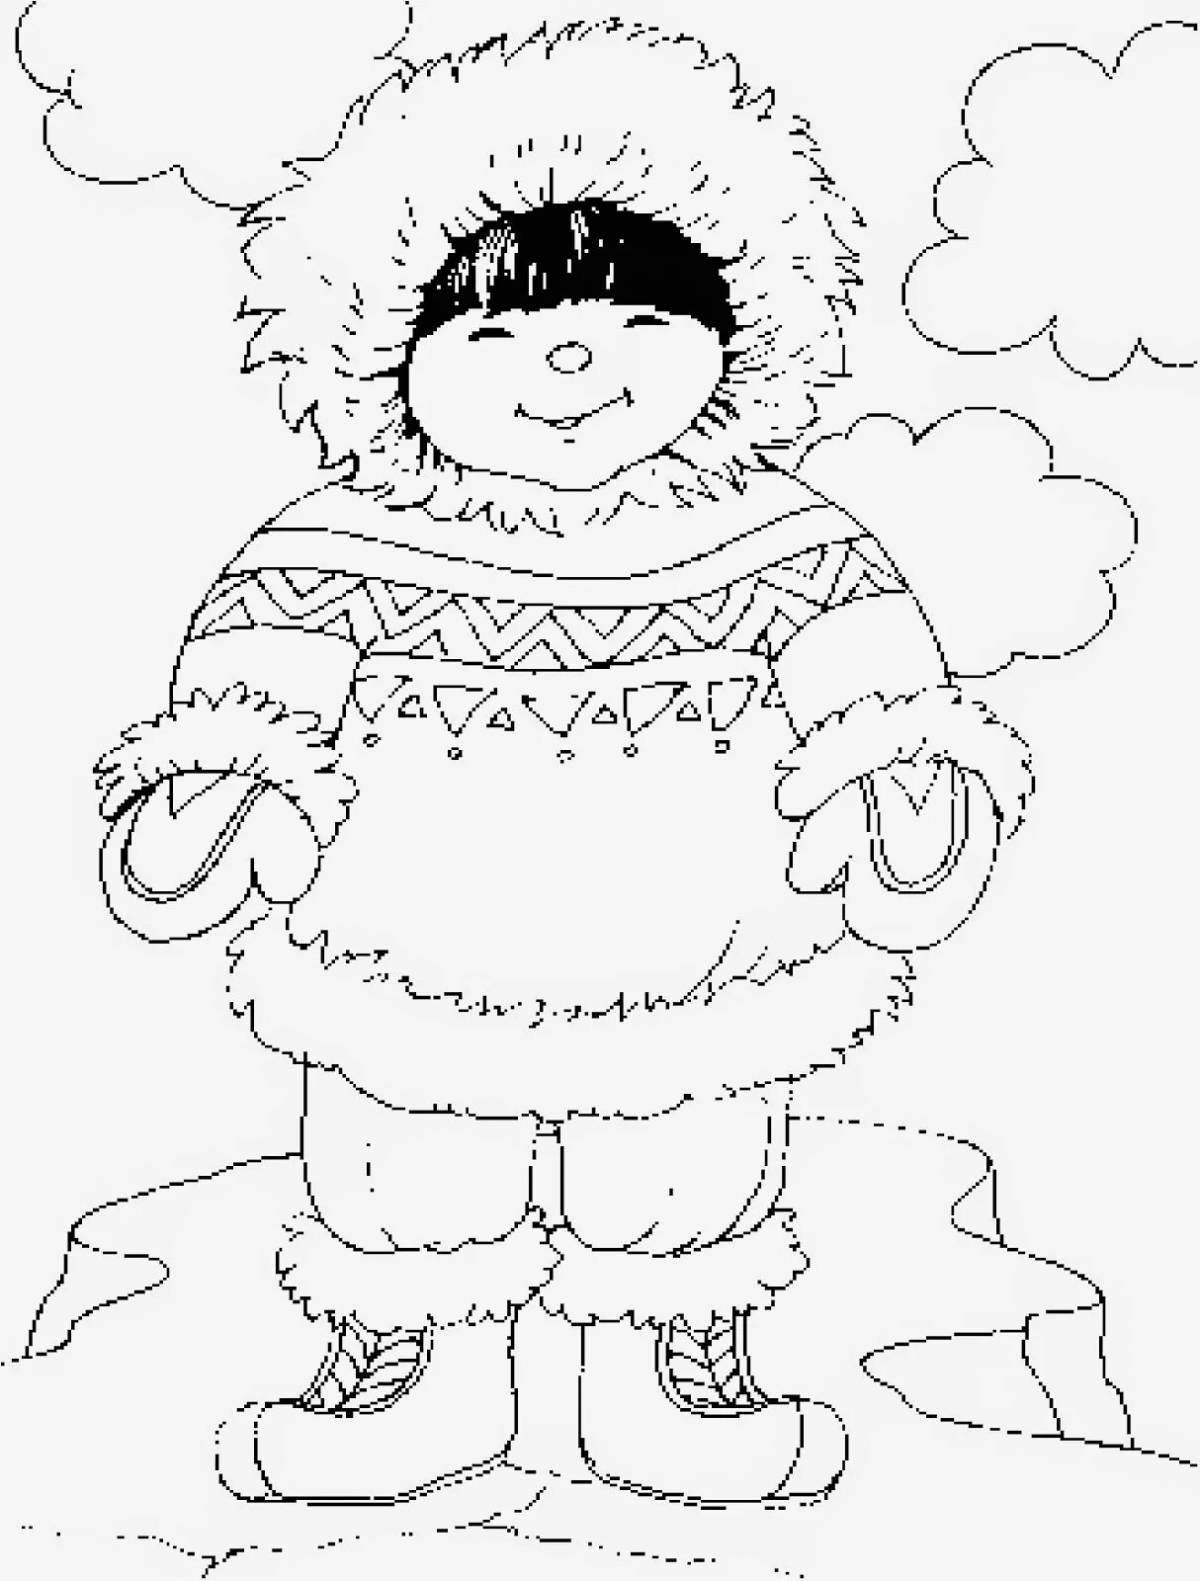 Fun eskimo coloring pages for kids